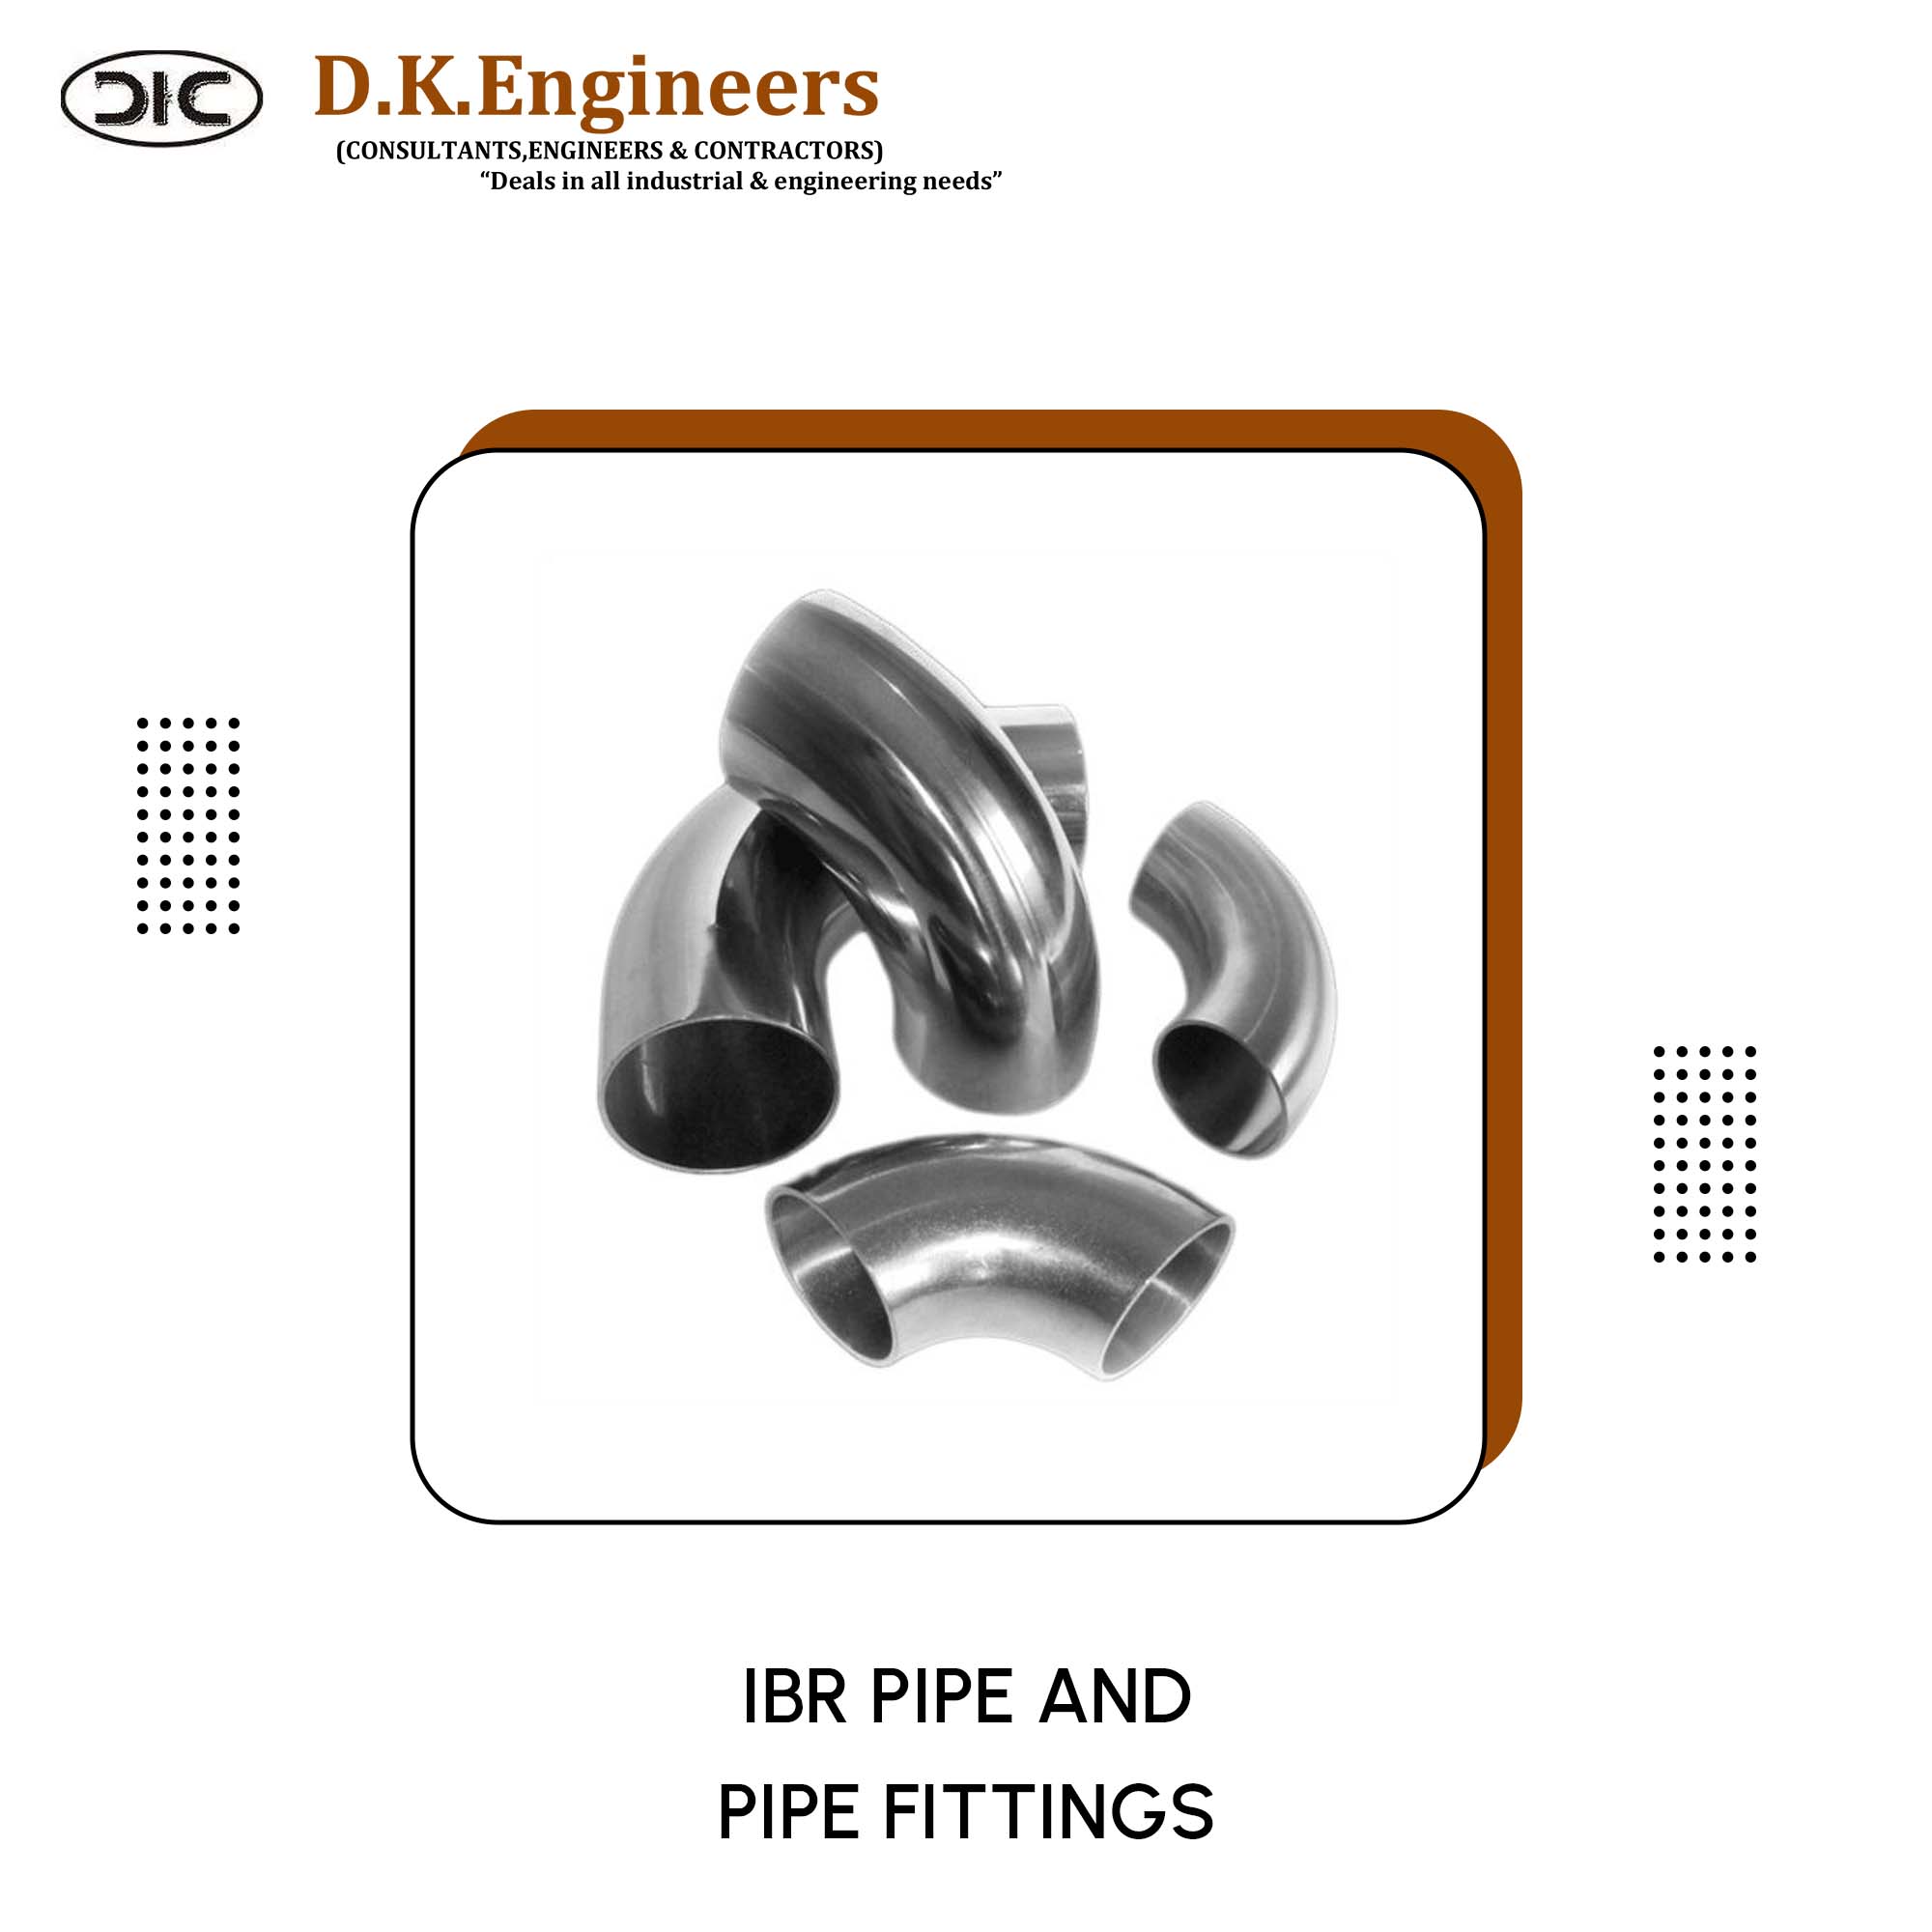 IBR PIPE AND PIPE FITTINGS